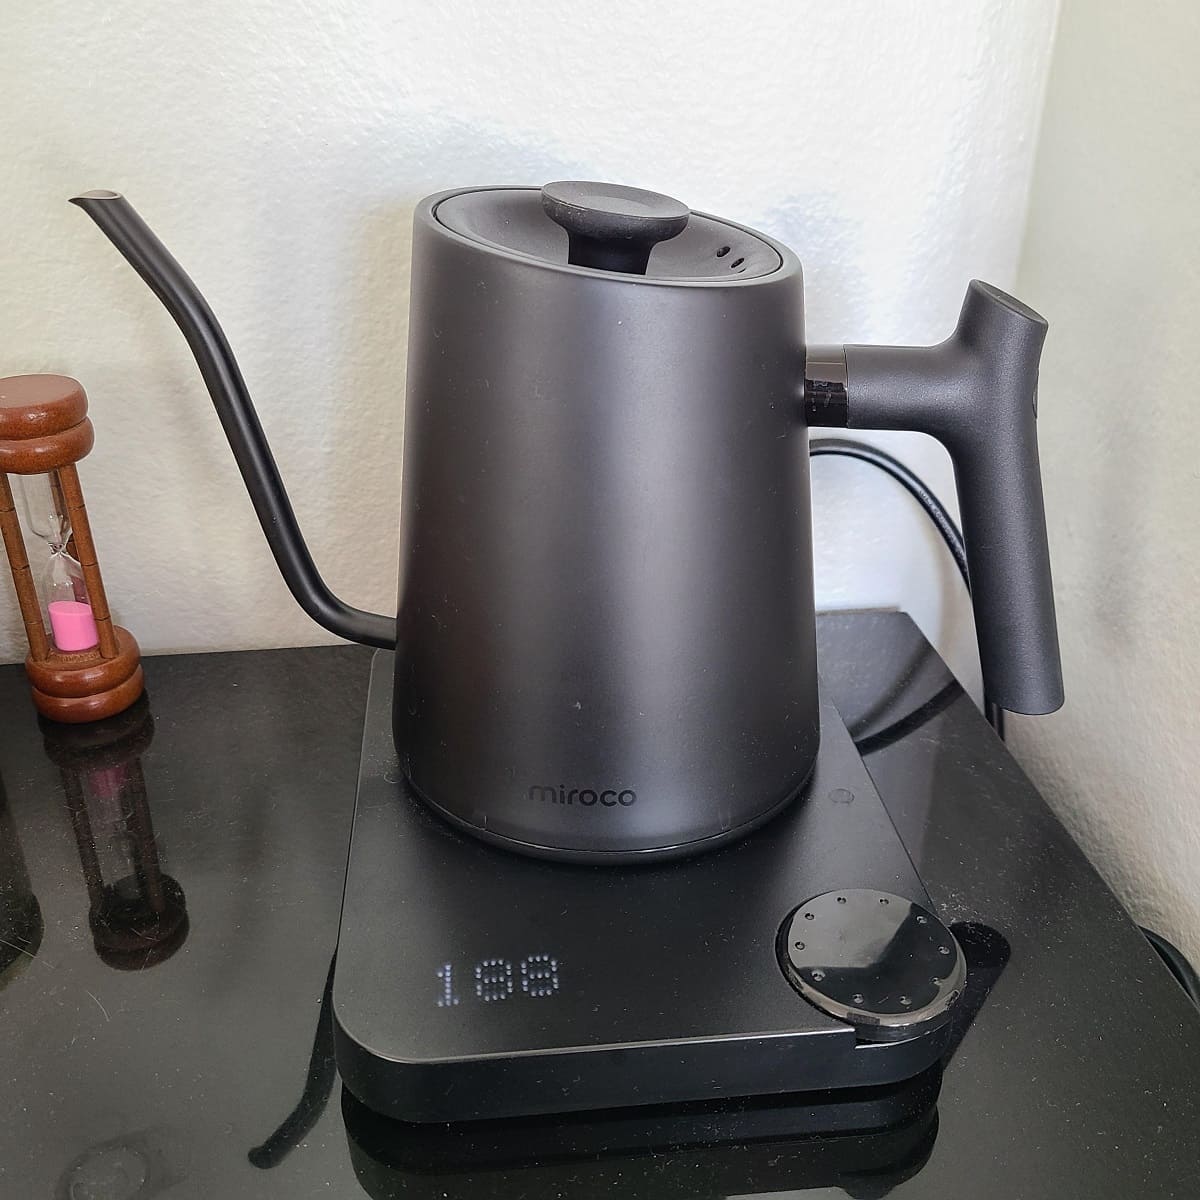 https://storables.com/wp-content/uploads/2023/11/10-best-miroco-electric-kettle-for-2023-1700114088.jpg